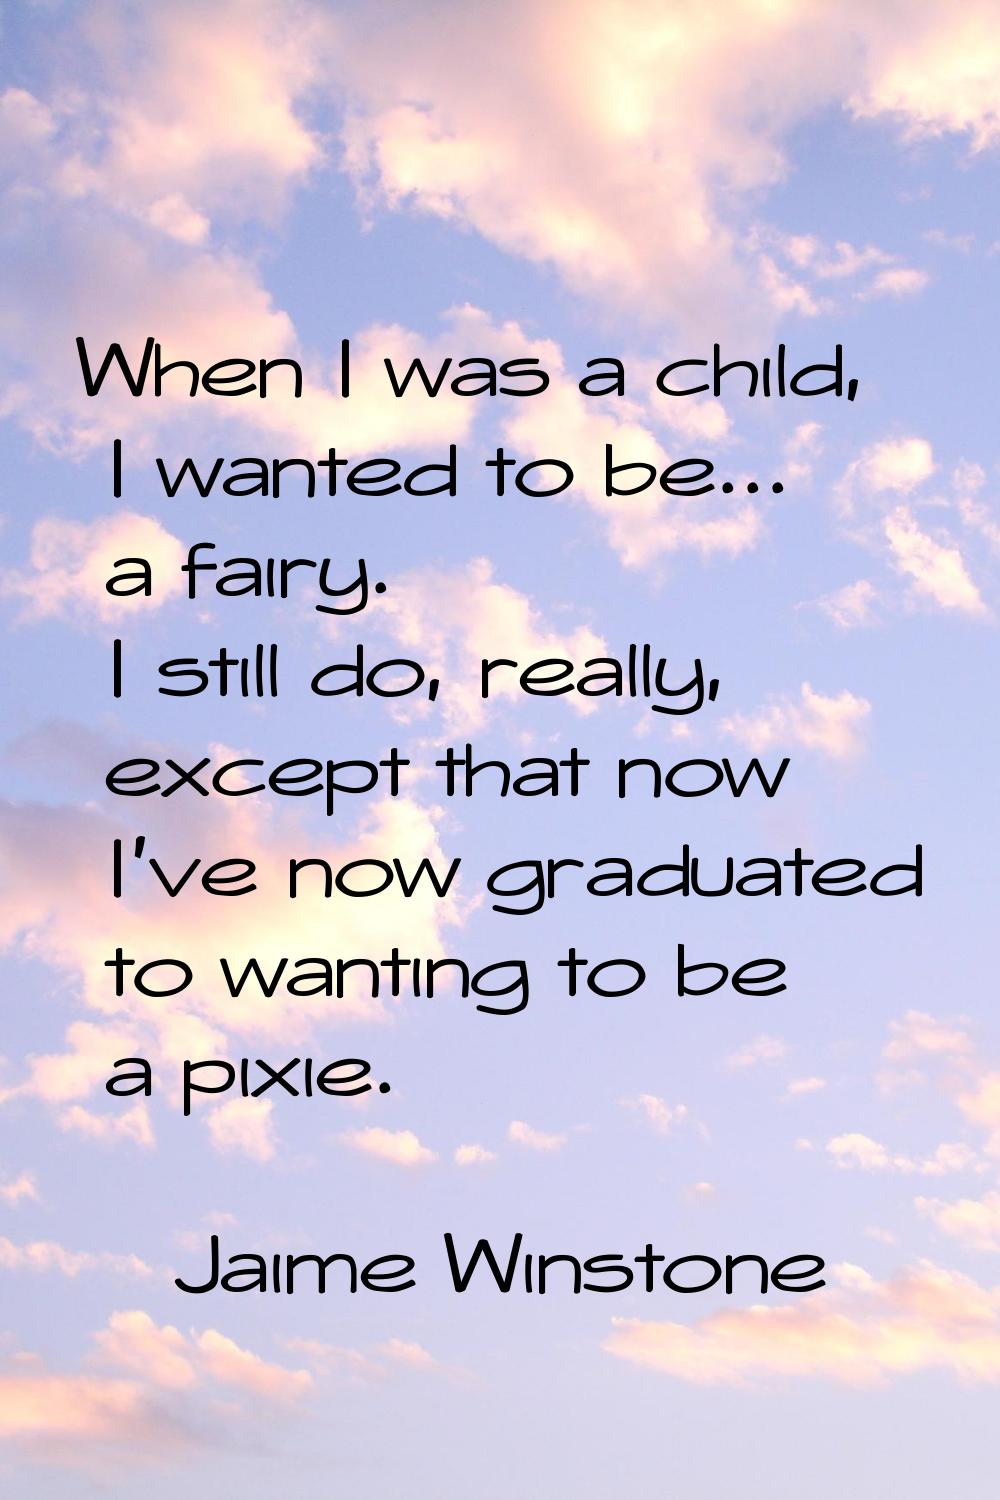 When I was a child, I wanted to be... a fairy. I still do, really, except that now I've now graduat